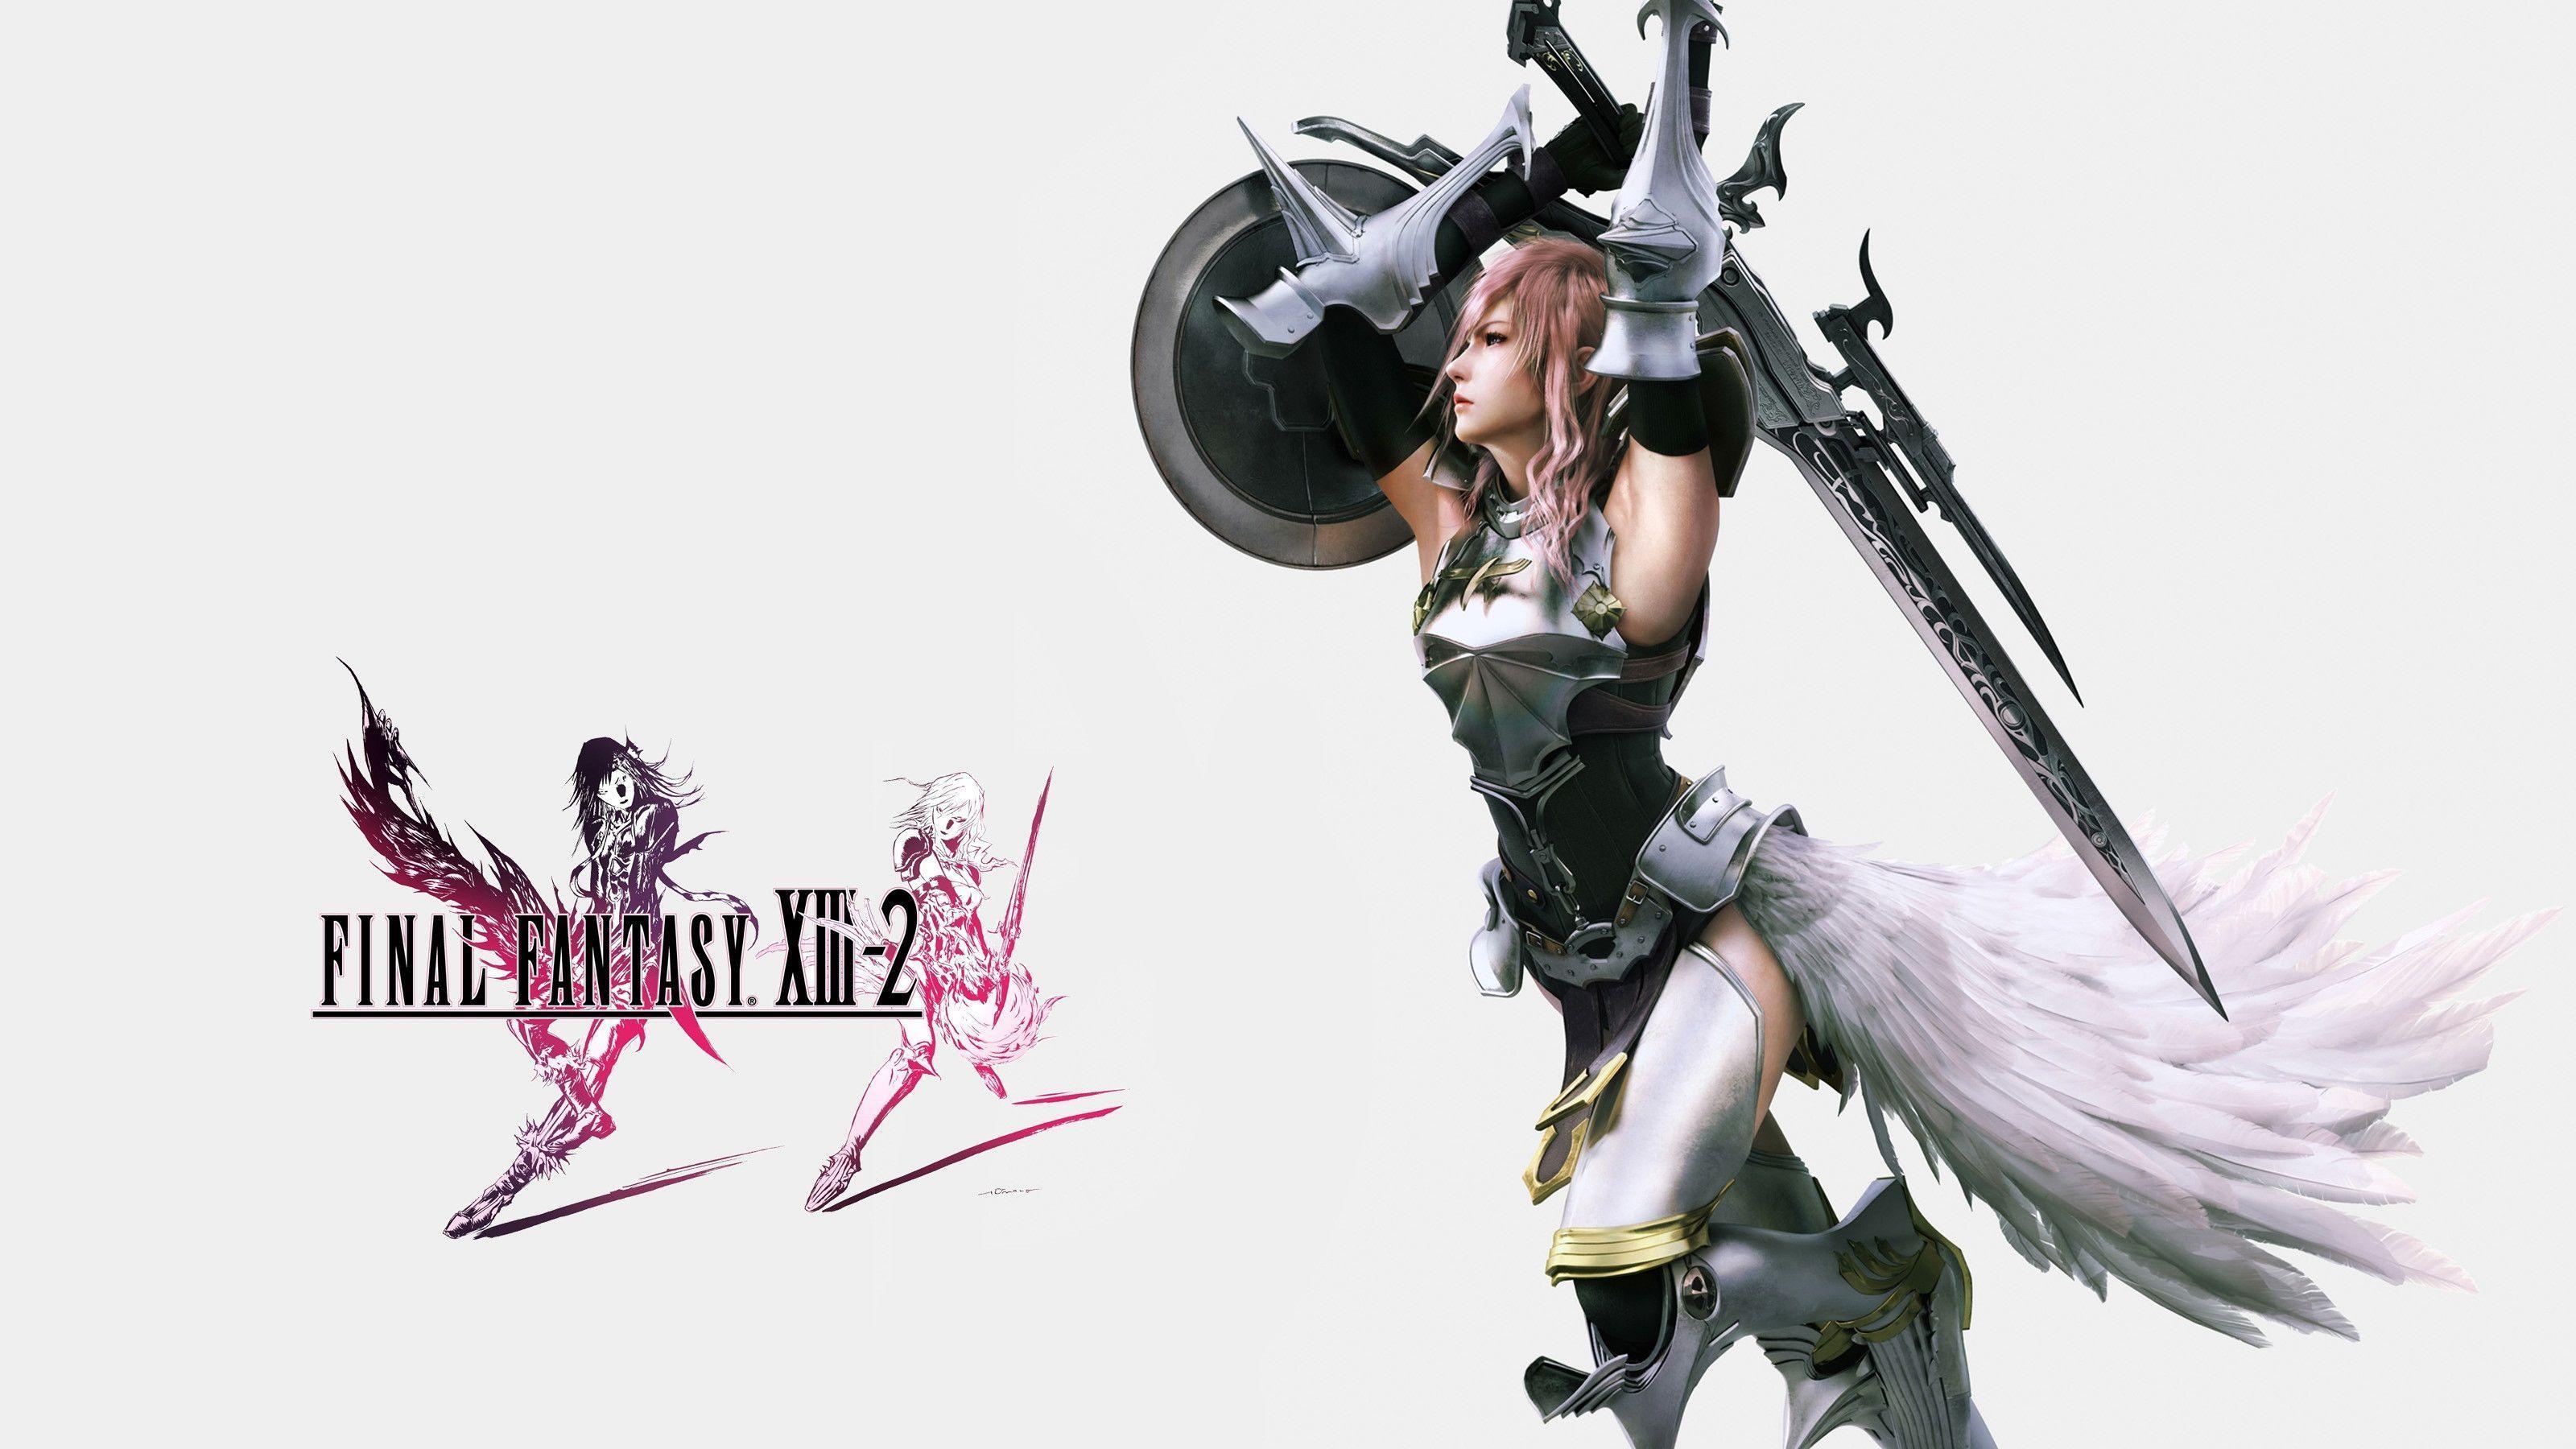 Final Fantasy Xiii-2 Game Save Download